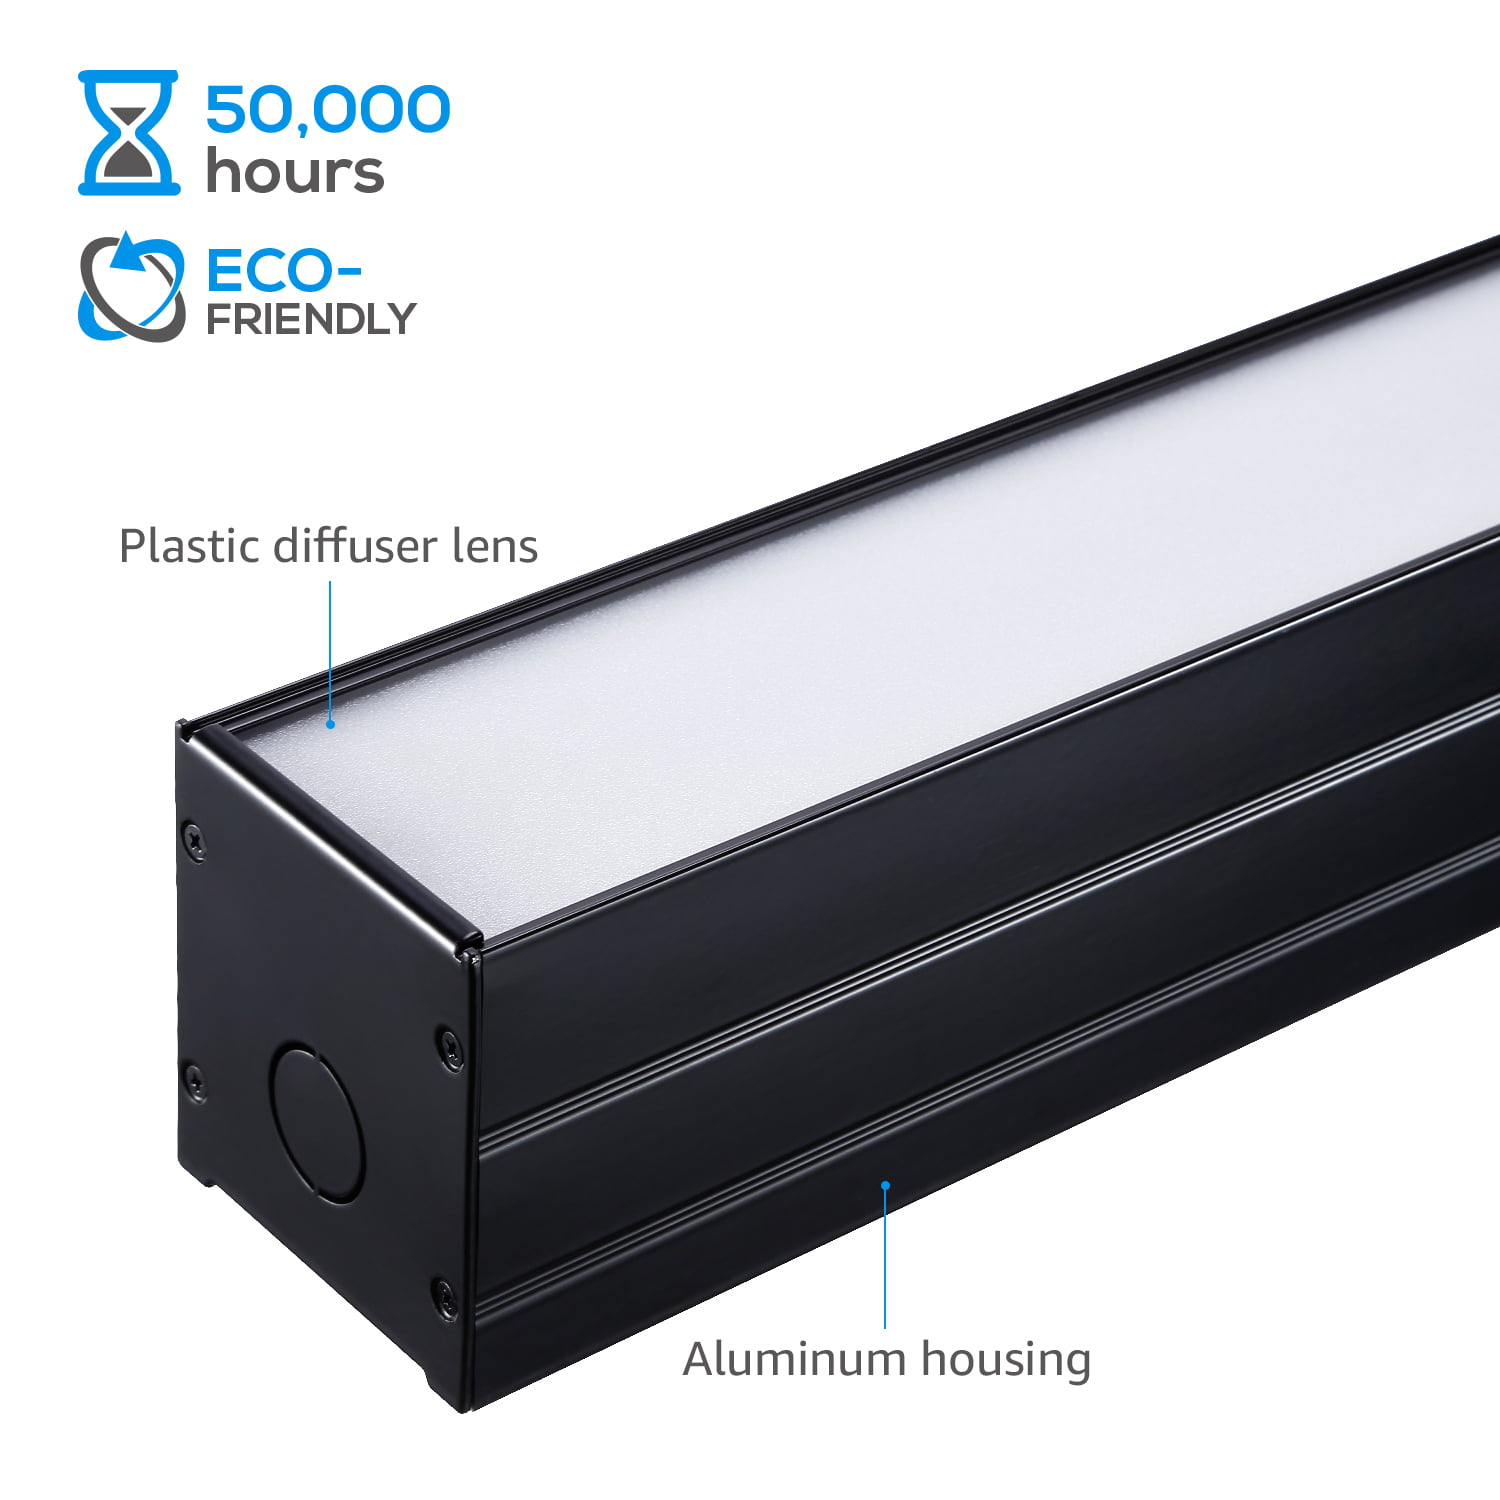 40W LEONLITE 4ft Dimmable LED Linear Light 100W-230W Eq. 4000K Cool White Pack of 2 5 Years Warranty UL & DLC Garage 4600lm Linkable Suspension Lighting Fixture Black for Office Market